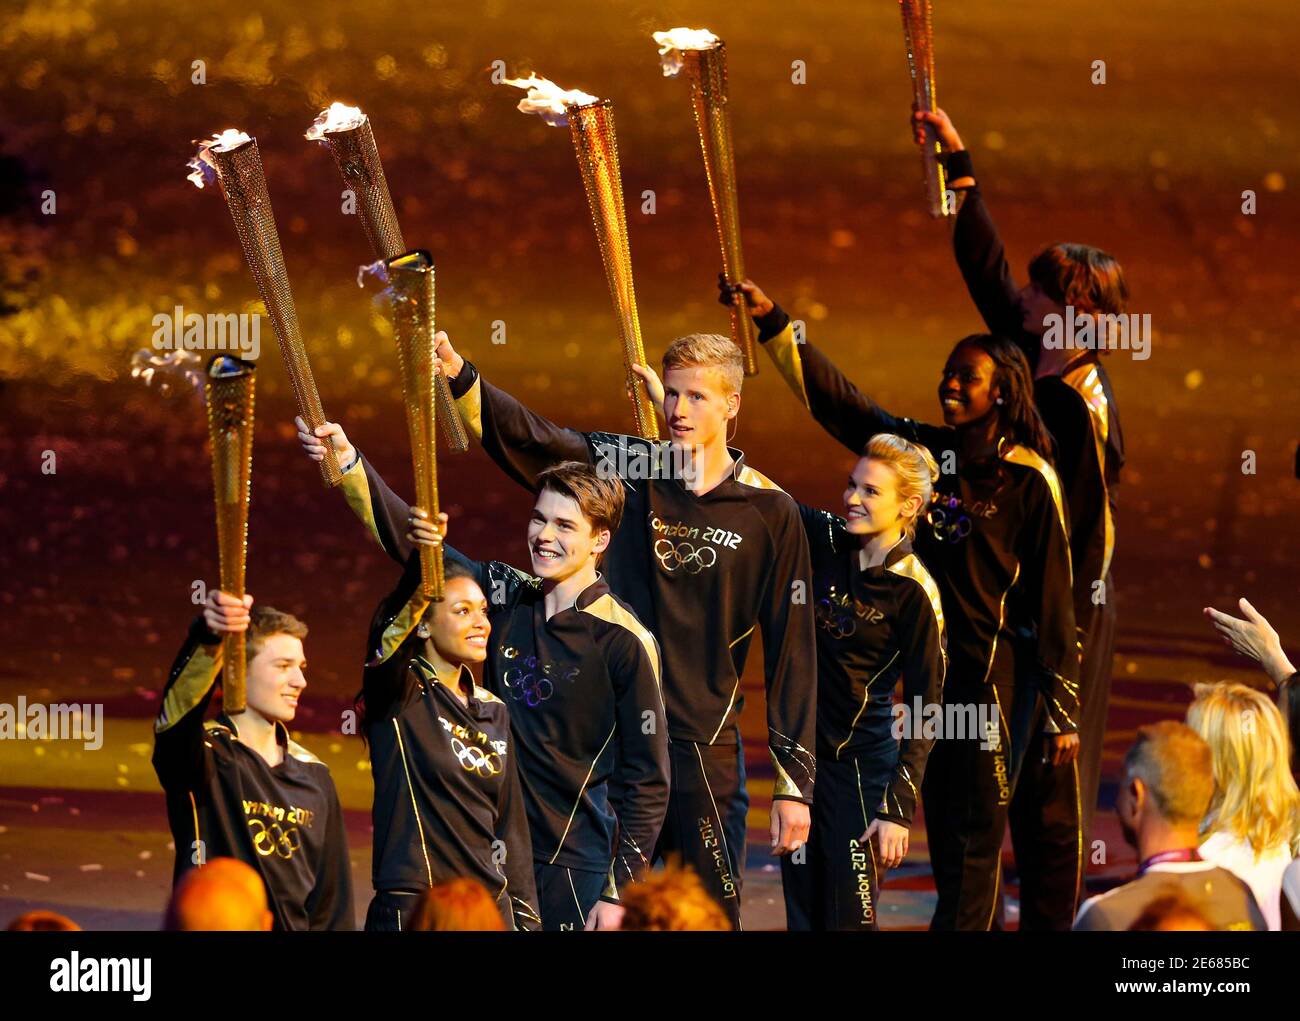 Seven final torchbearers prepare to light the Olympic Cauldron during the opening ceremony of the London 2012 Olympic Games at the Olympic Stadium July 27, 2012.       REUTERS/Mike Blake (BRITAIN  - Tags: SPORT OLYMPICS) Stock Photo